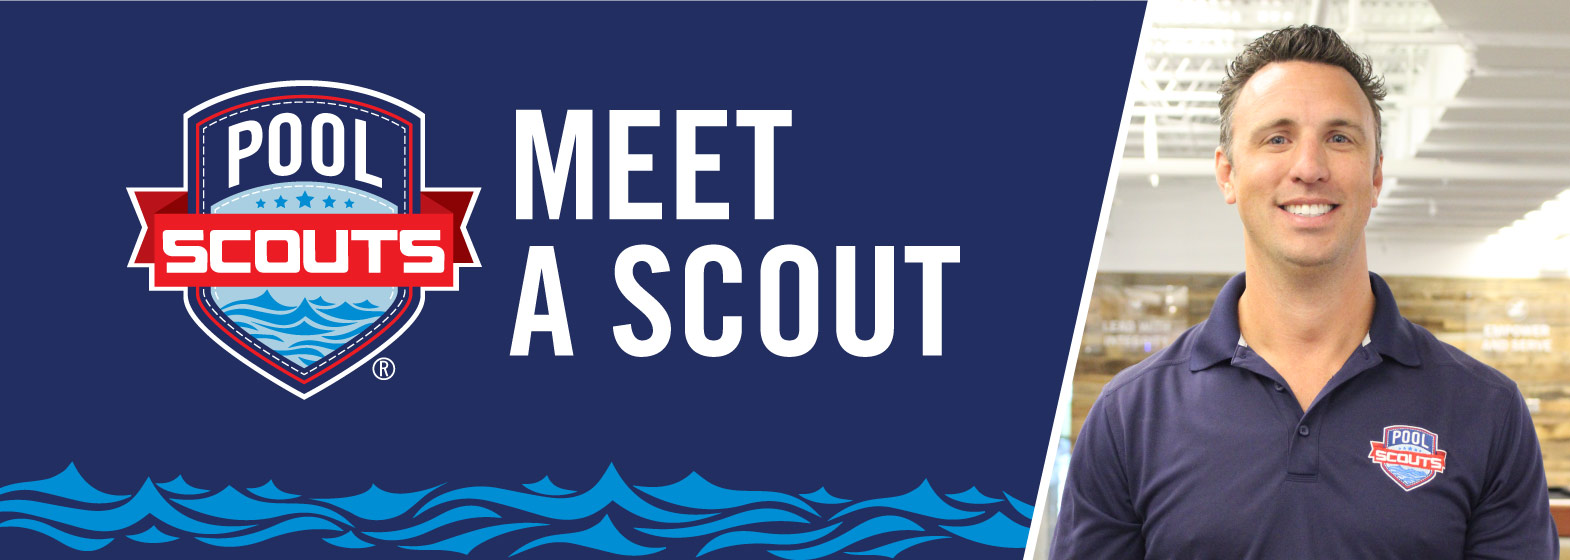 Image of Meet-A-Scout Series: Todd Crowe, Director of Operations